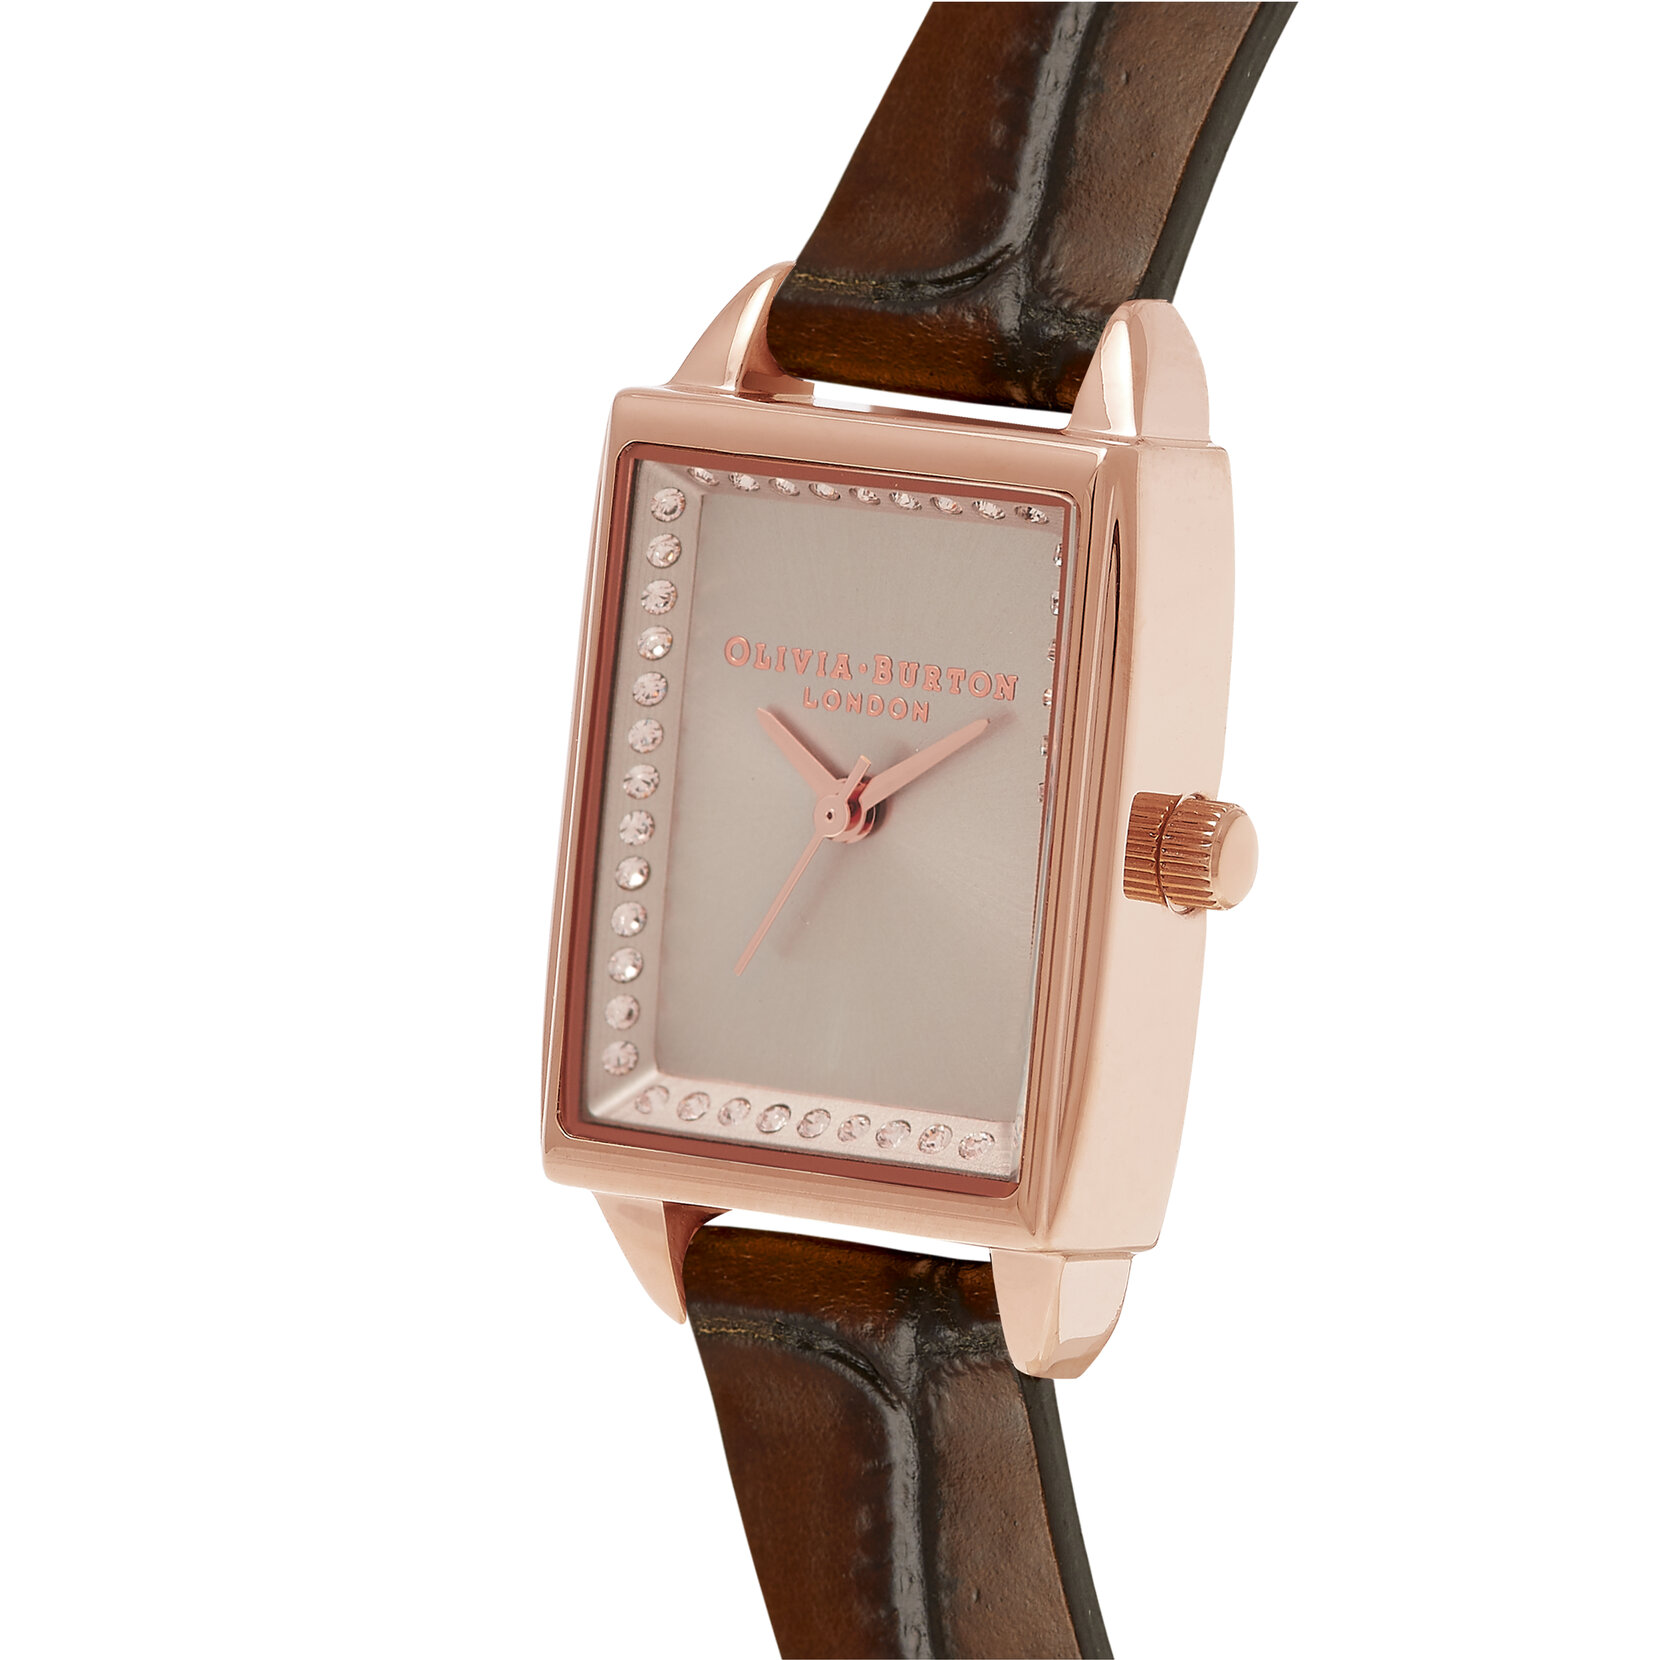 Rectangular Rose Gold & Brown Leather Strap Watch